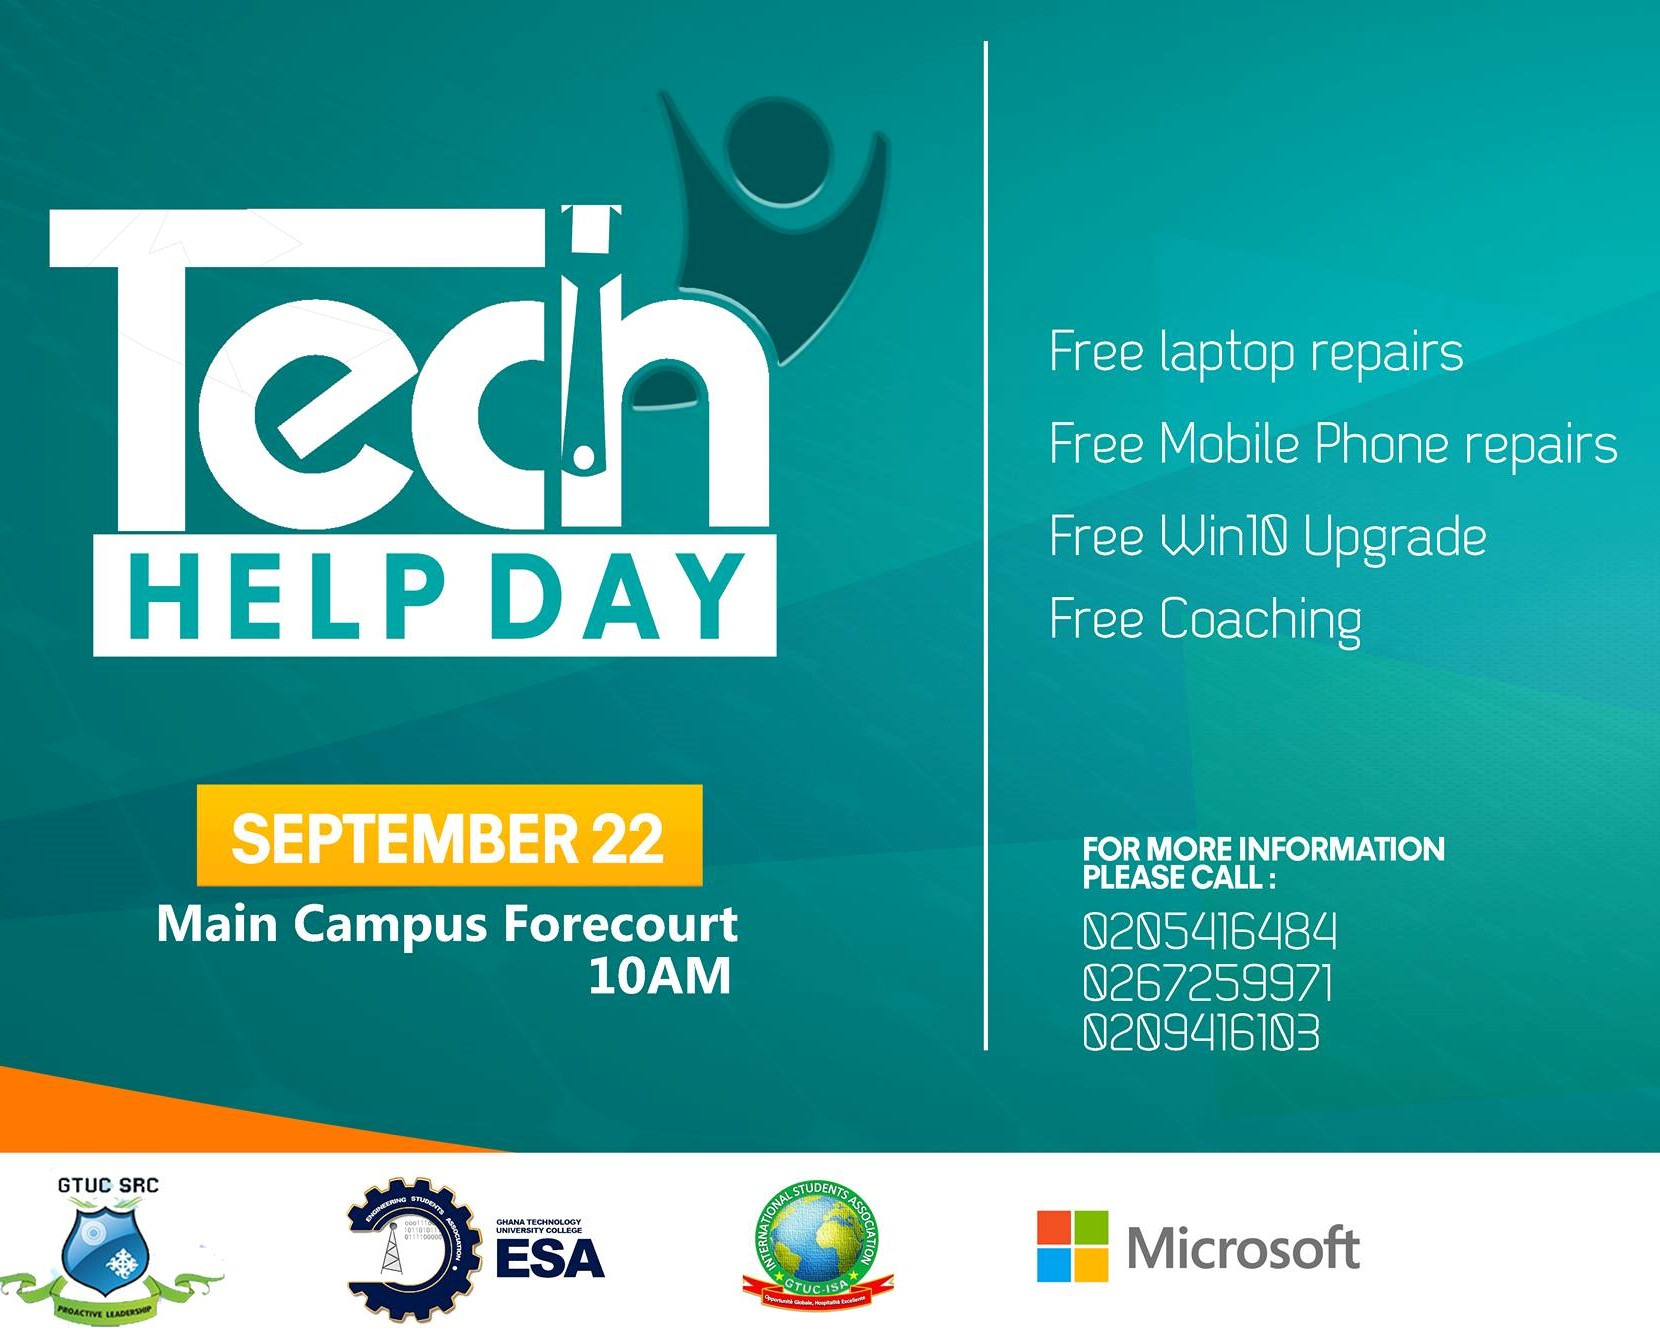 Ghana Technology University College Microsoft Student Partners are having a Tech Help Day